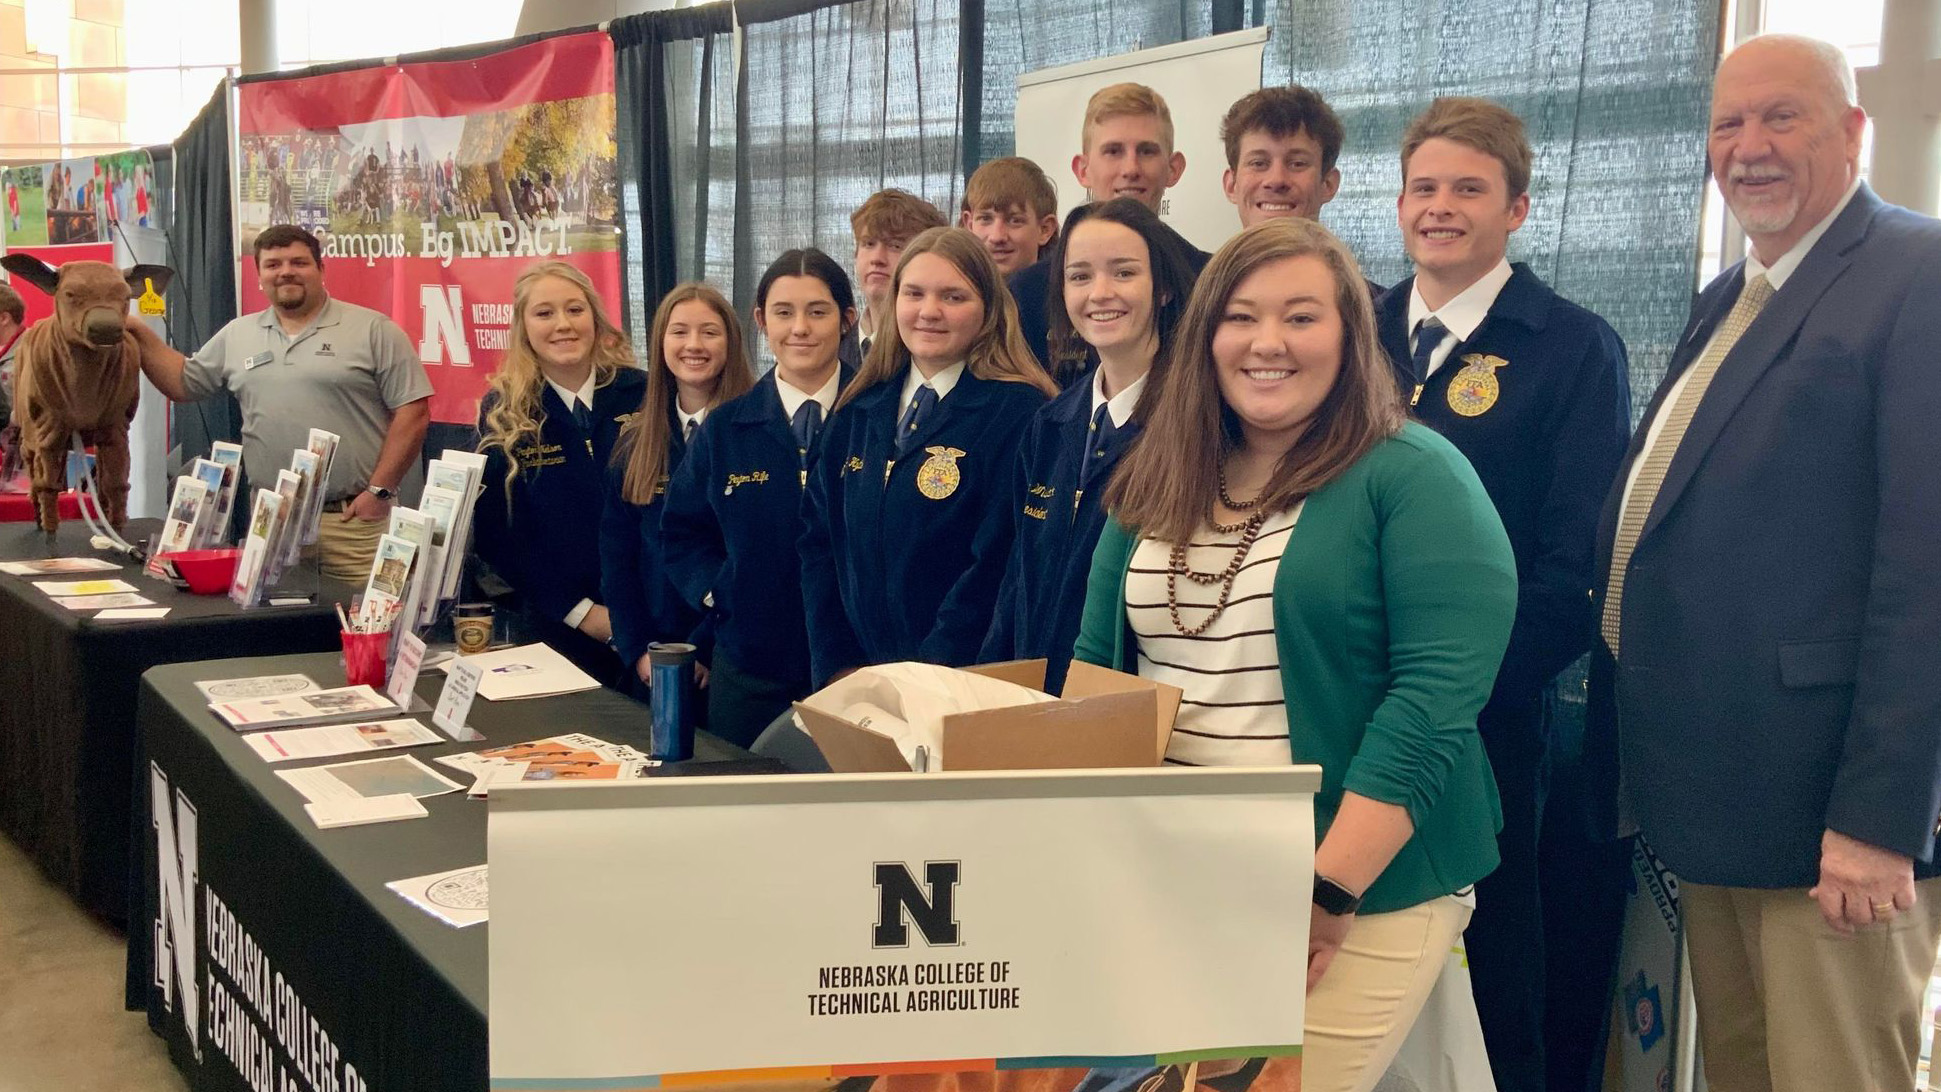 Kayla Mues (front, right) is advisor with the Dundy County-Stratton FFA Chapter. The NCTA alumna brought students by the Nebraska College of Technical Agriculture exhibit during the 94th Nebraska FFA Convention. (Photo by Andela Taylor / NCTA)